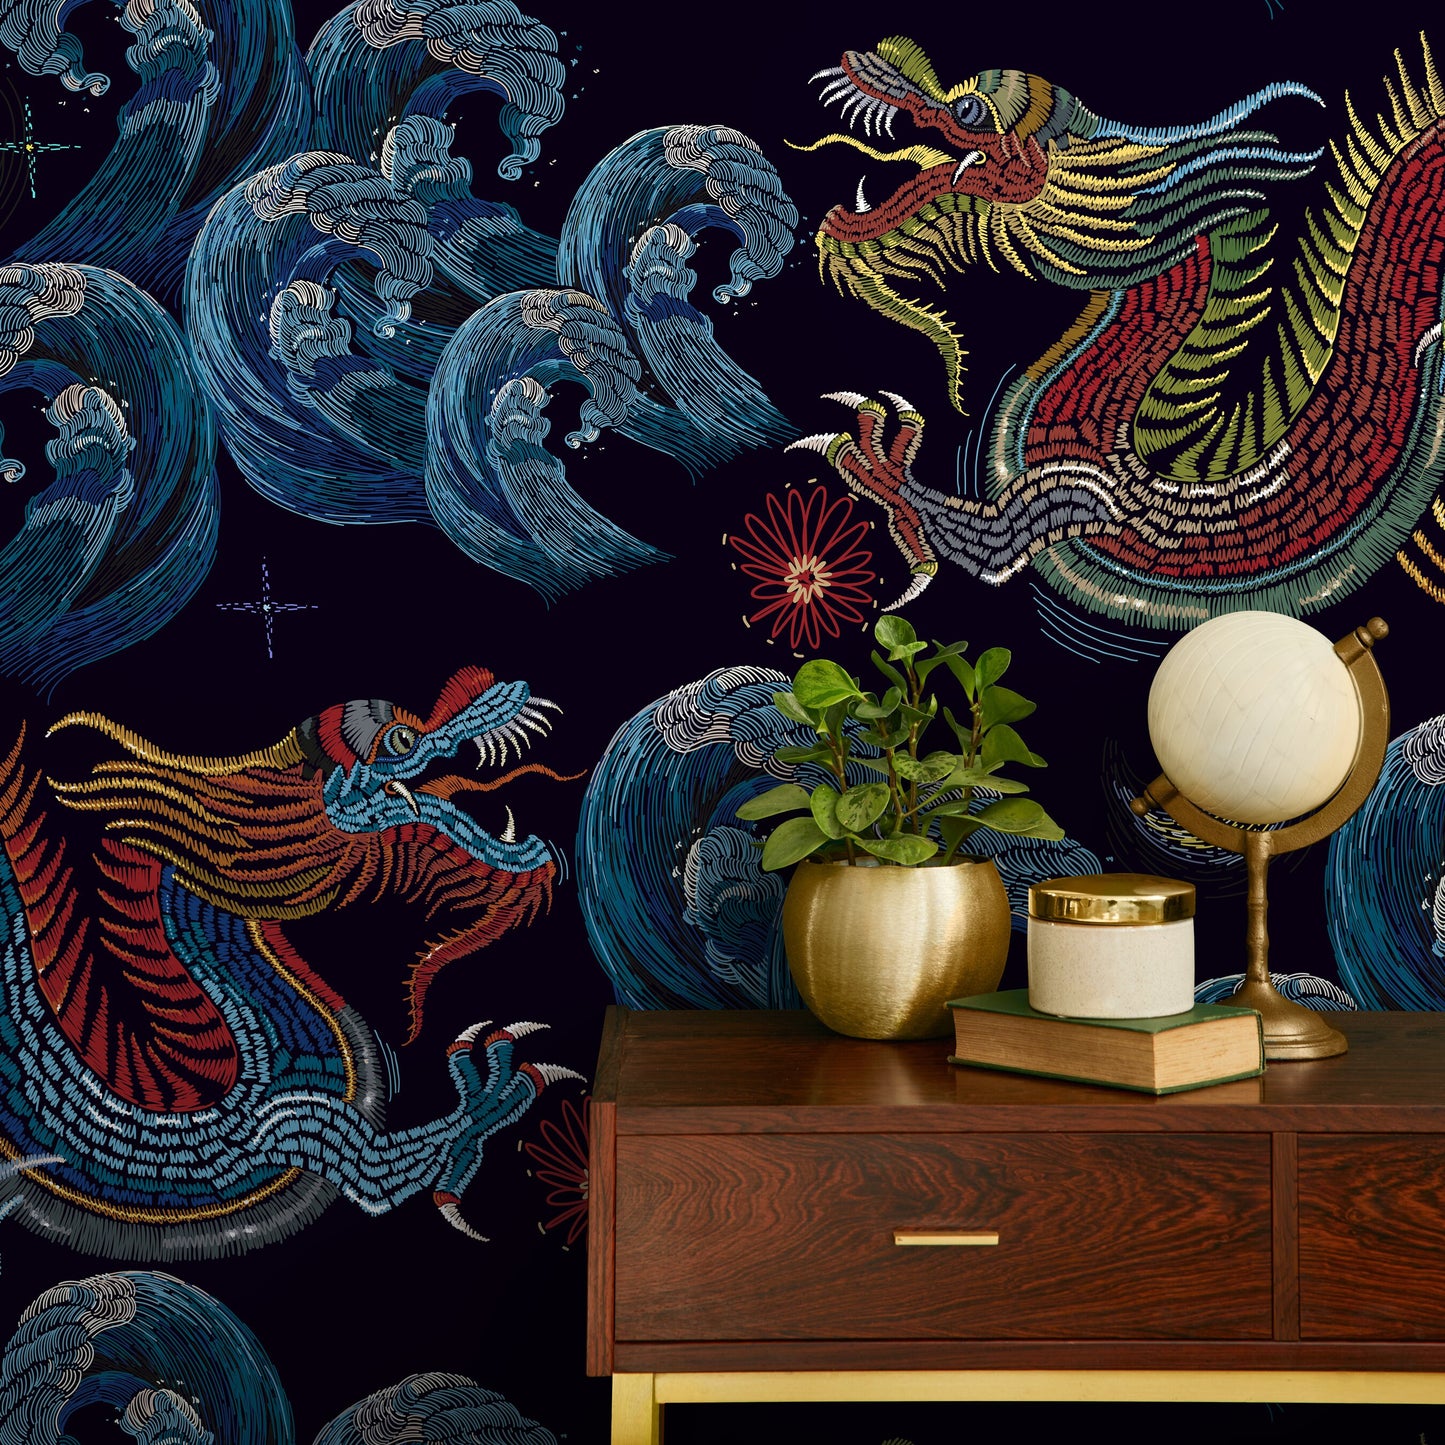 Vintage Chinoiserie Wallpaper Dragon Maximalist Wallpaper Peel and Stick and Traditional Wallpaper - D875